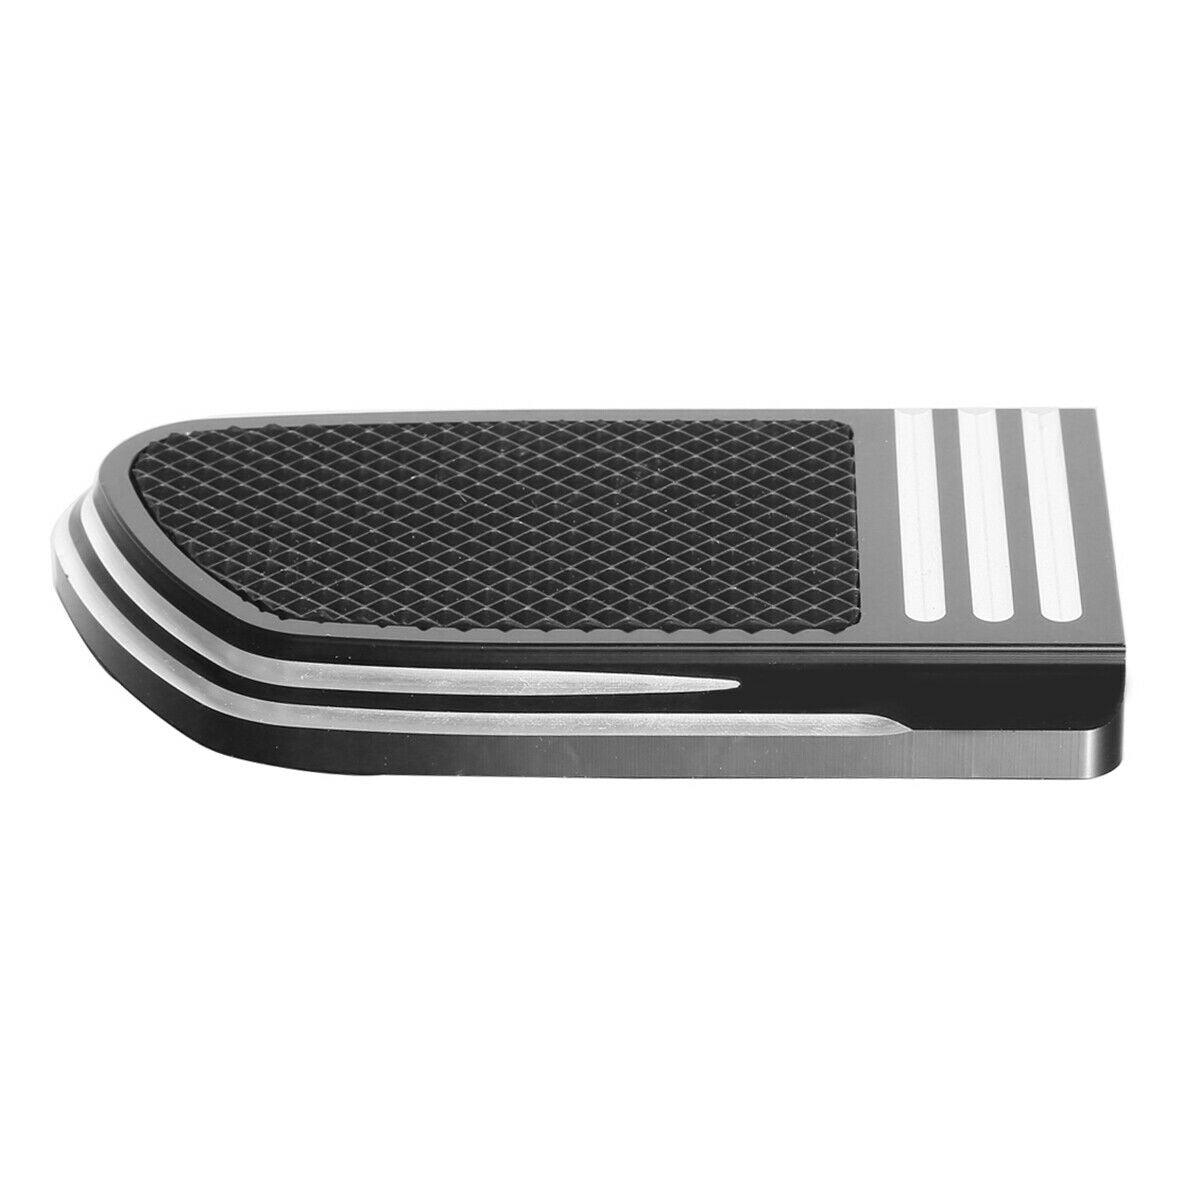 Large Black Brake Pedal Pad Fit For Harley Touring Road King Softail Defiance - Moto Life Products